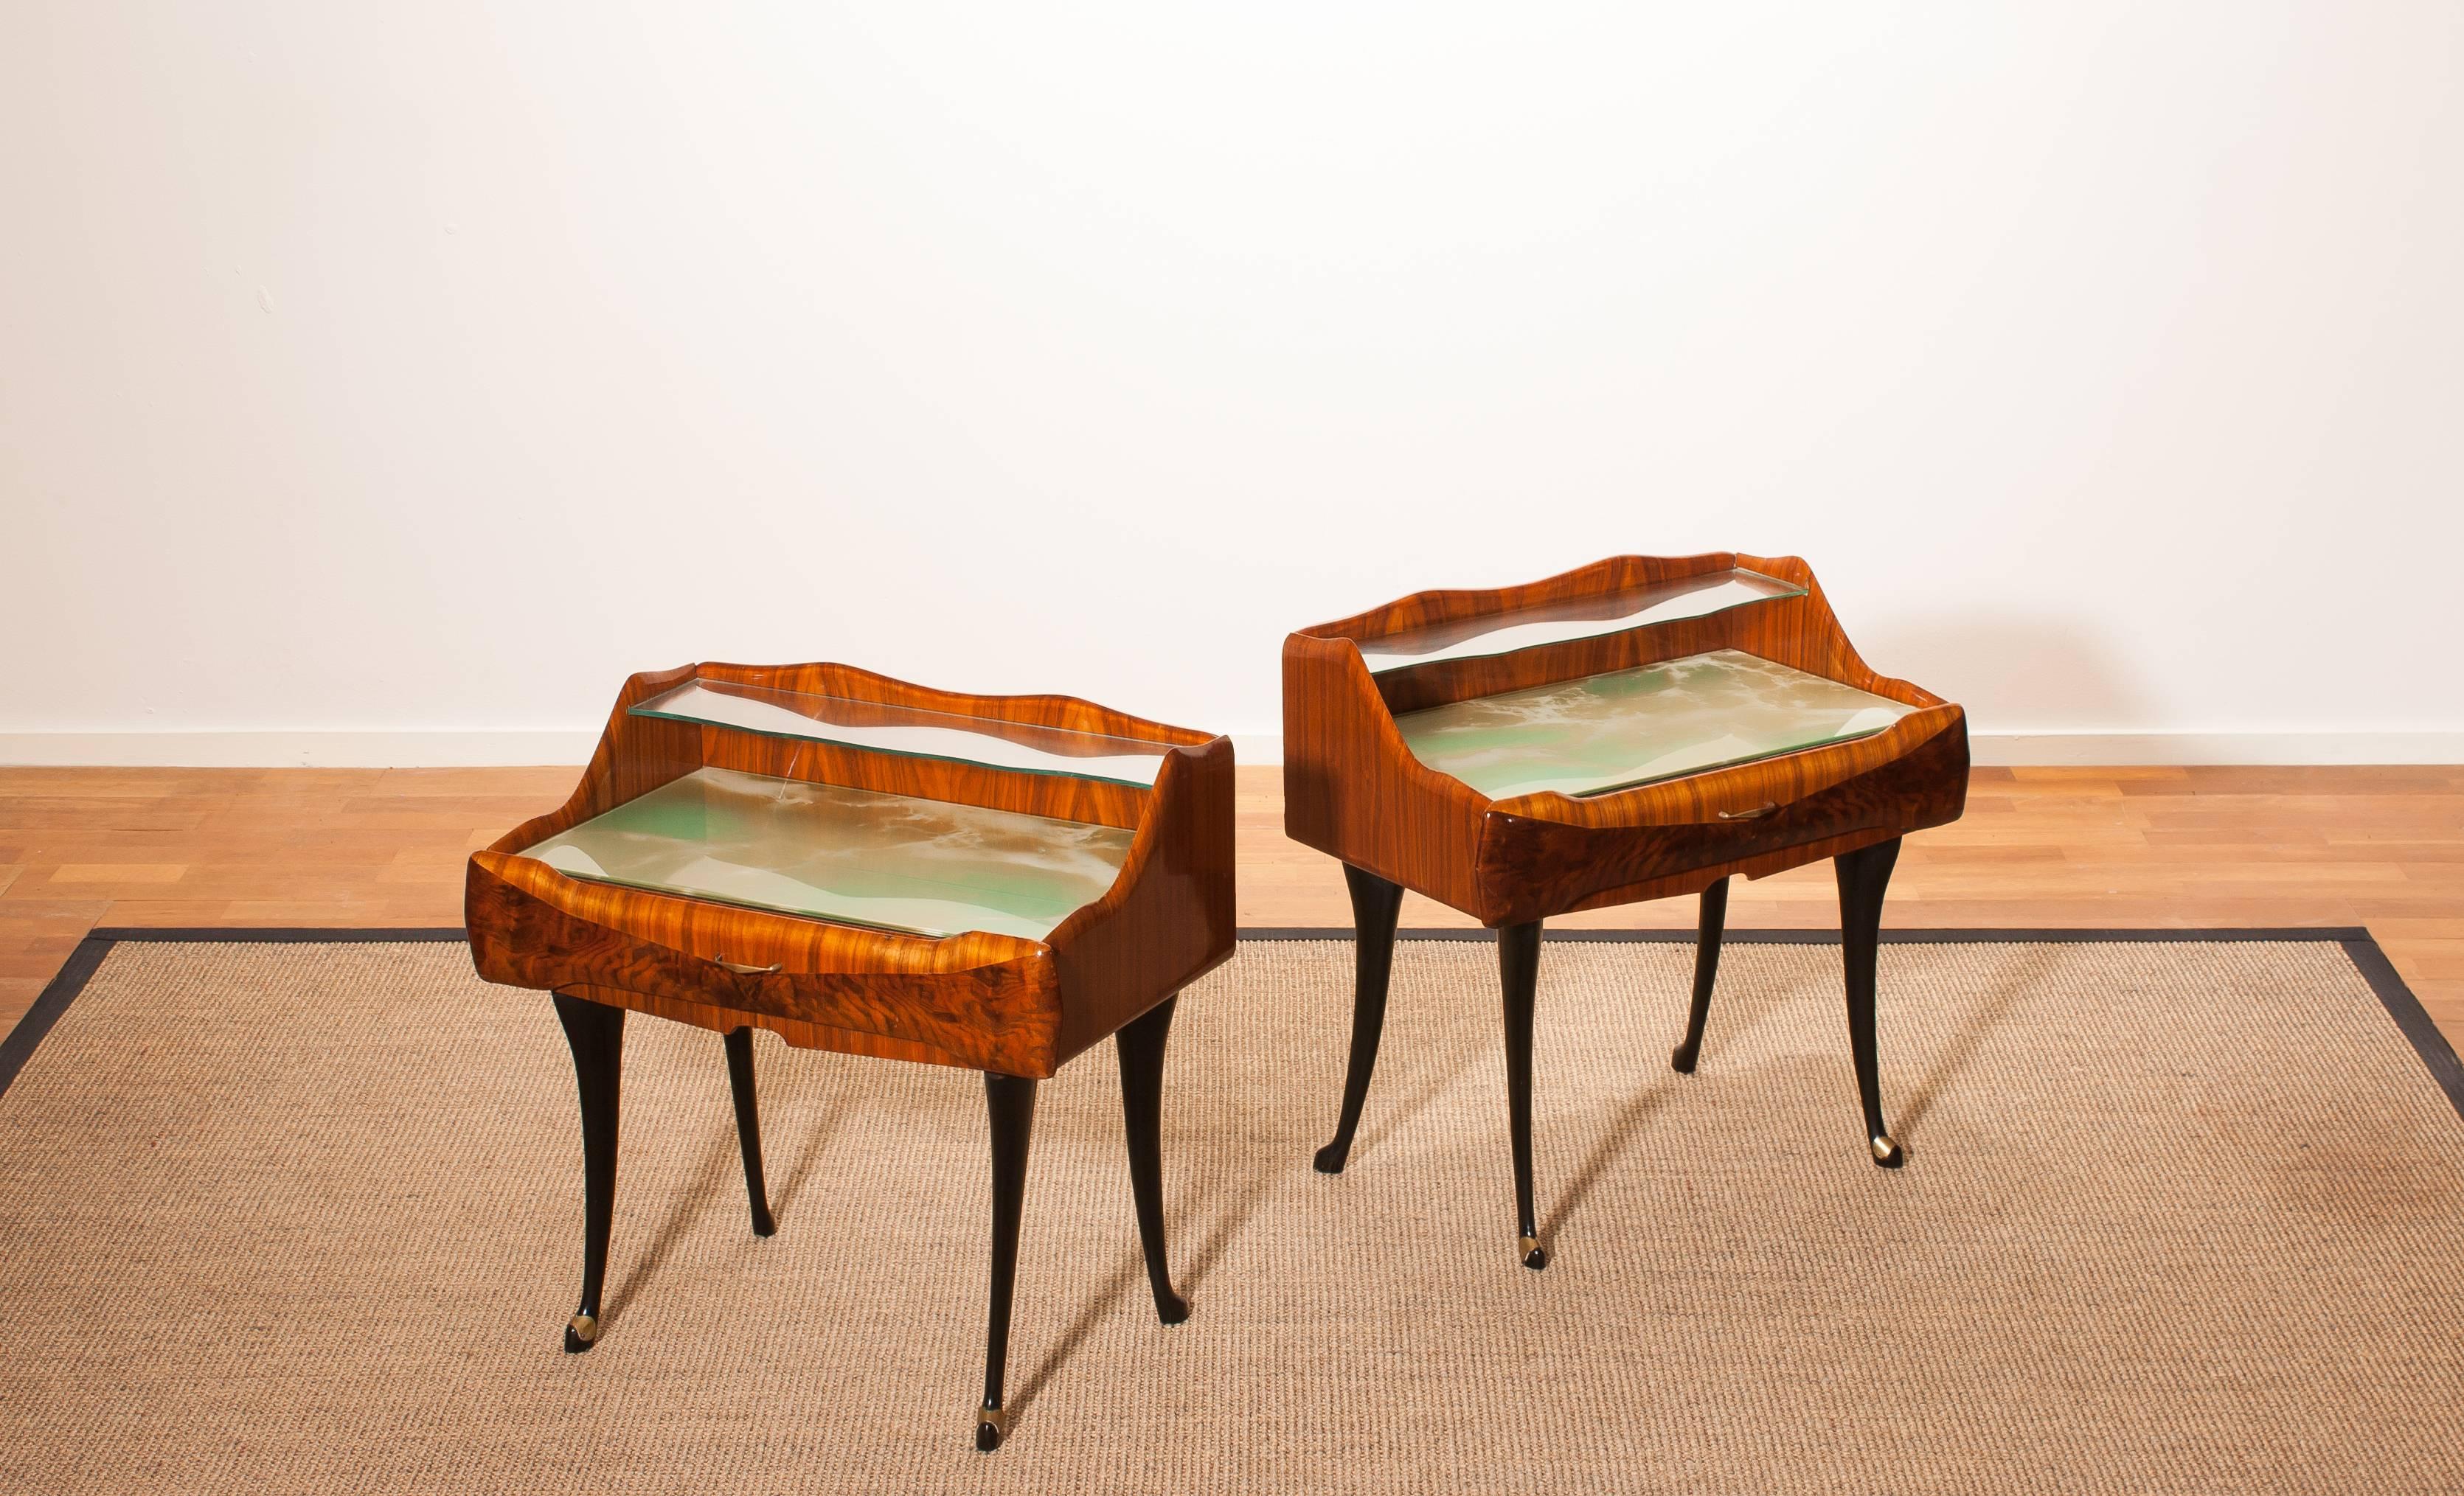 This stylish pair of 1950s nightstands by Paolo Buffa are in excellent condition
Stylish glass shelf, sculpted two-tone frame and black slim legs with brass shoes add.
The top of the nightstands is covered with a marbled glass top and a